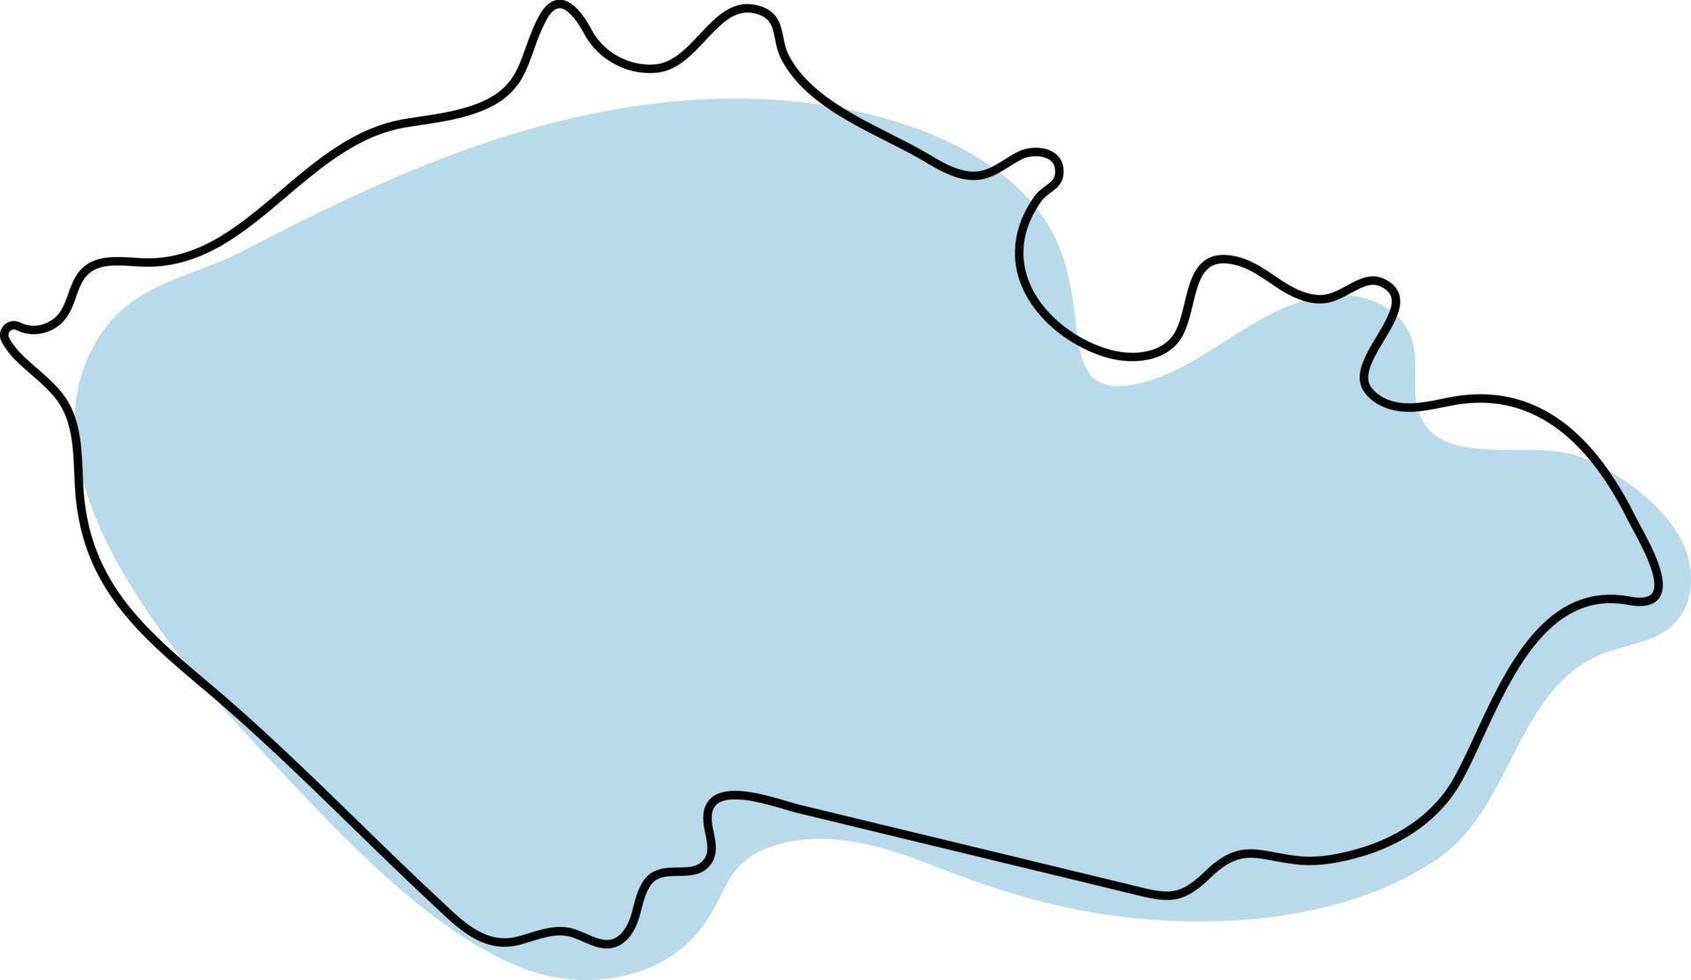 Stylized simple outline map of Czech icon. Blue sketch map of Czech vector illustration